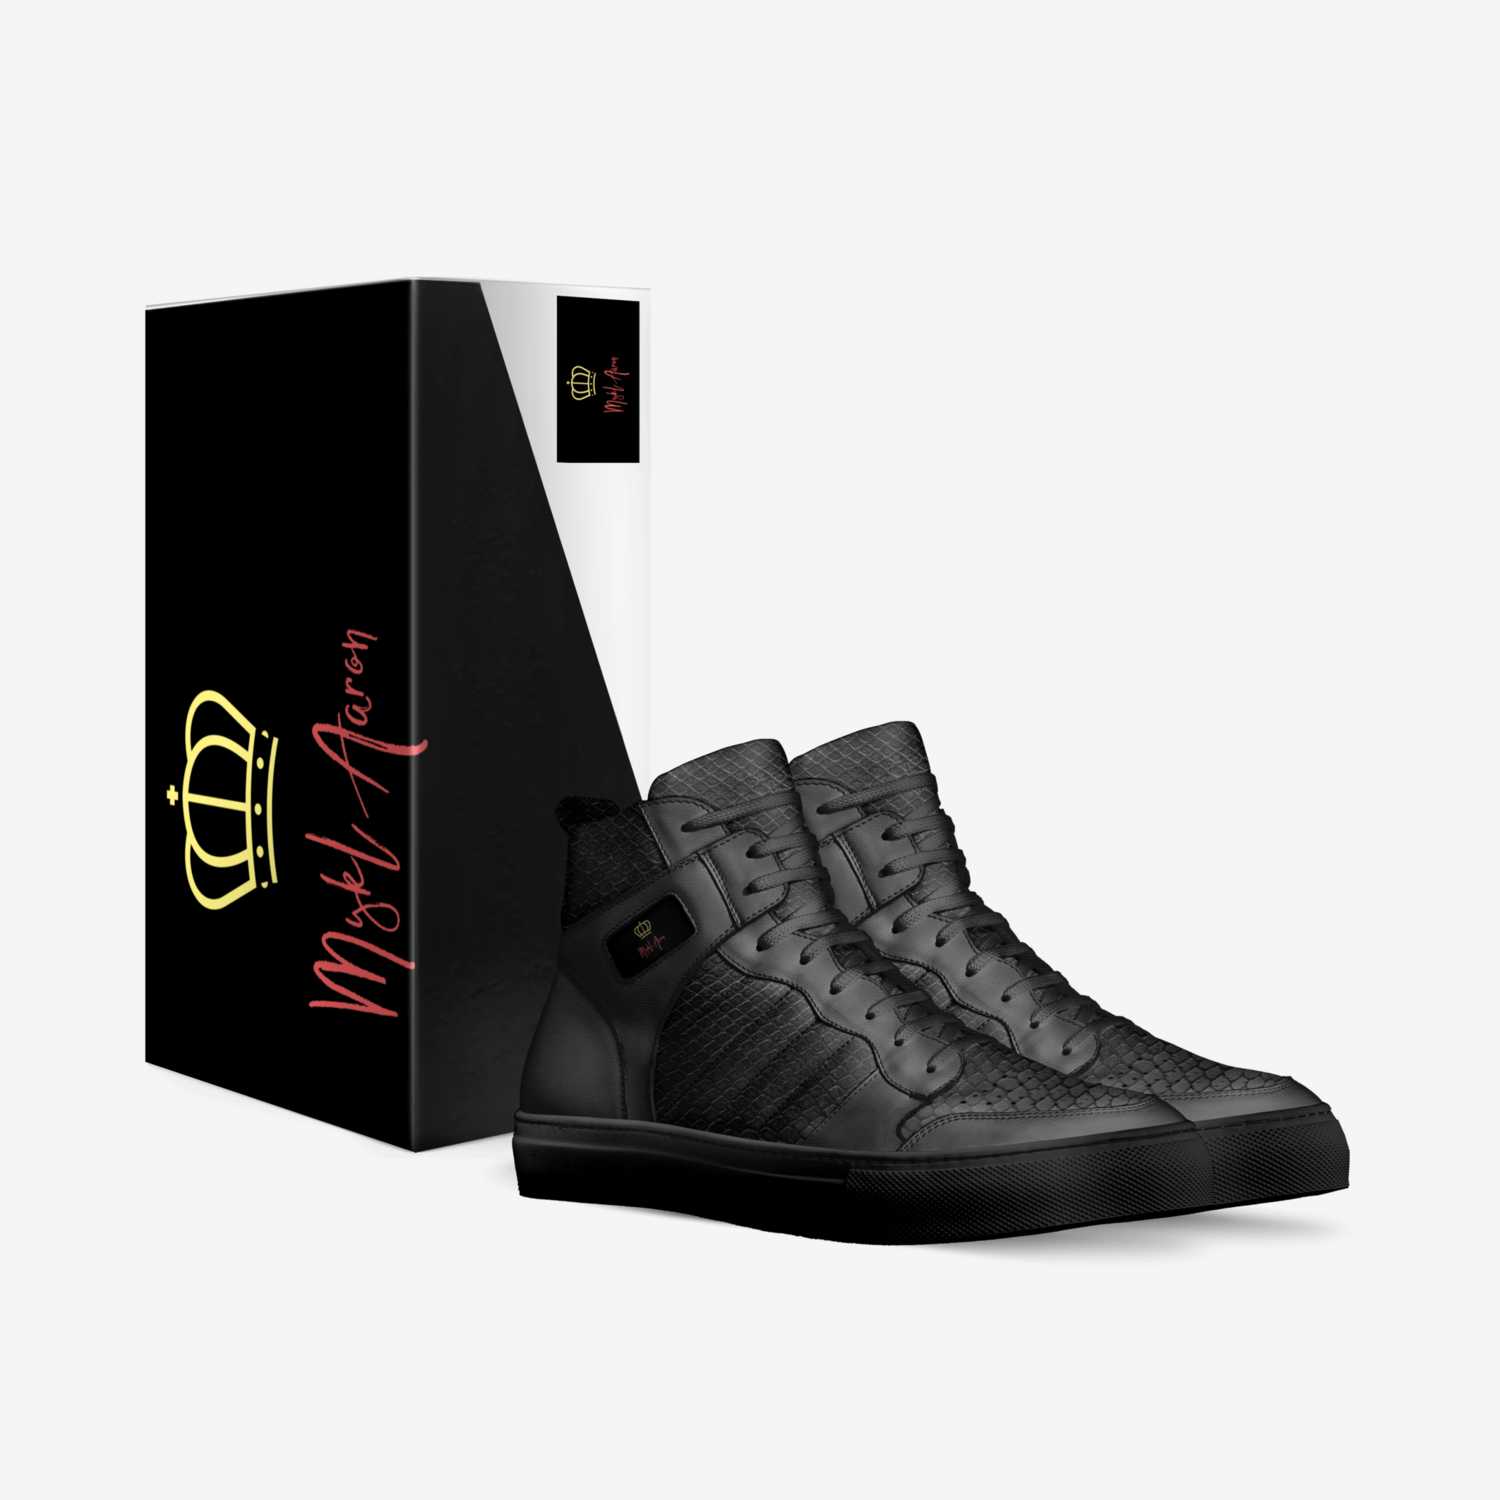 Mykl Aaron custom made in Italy shoes by Michael Kimbrough | Box view